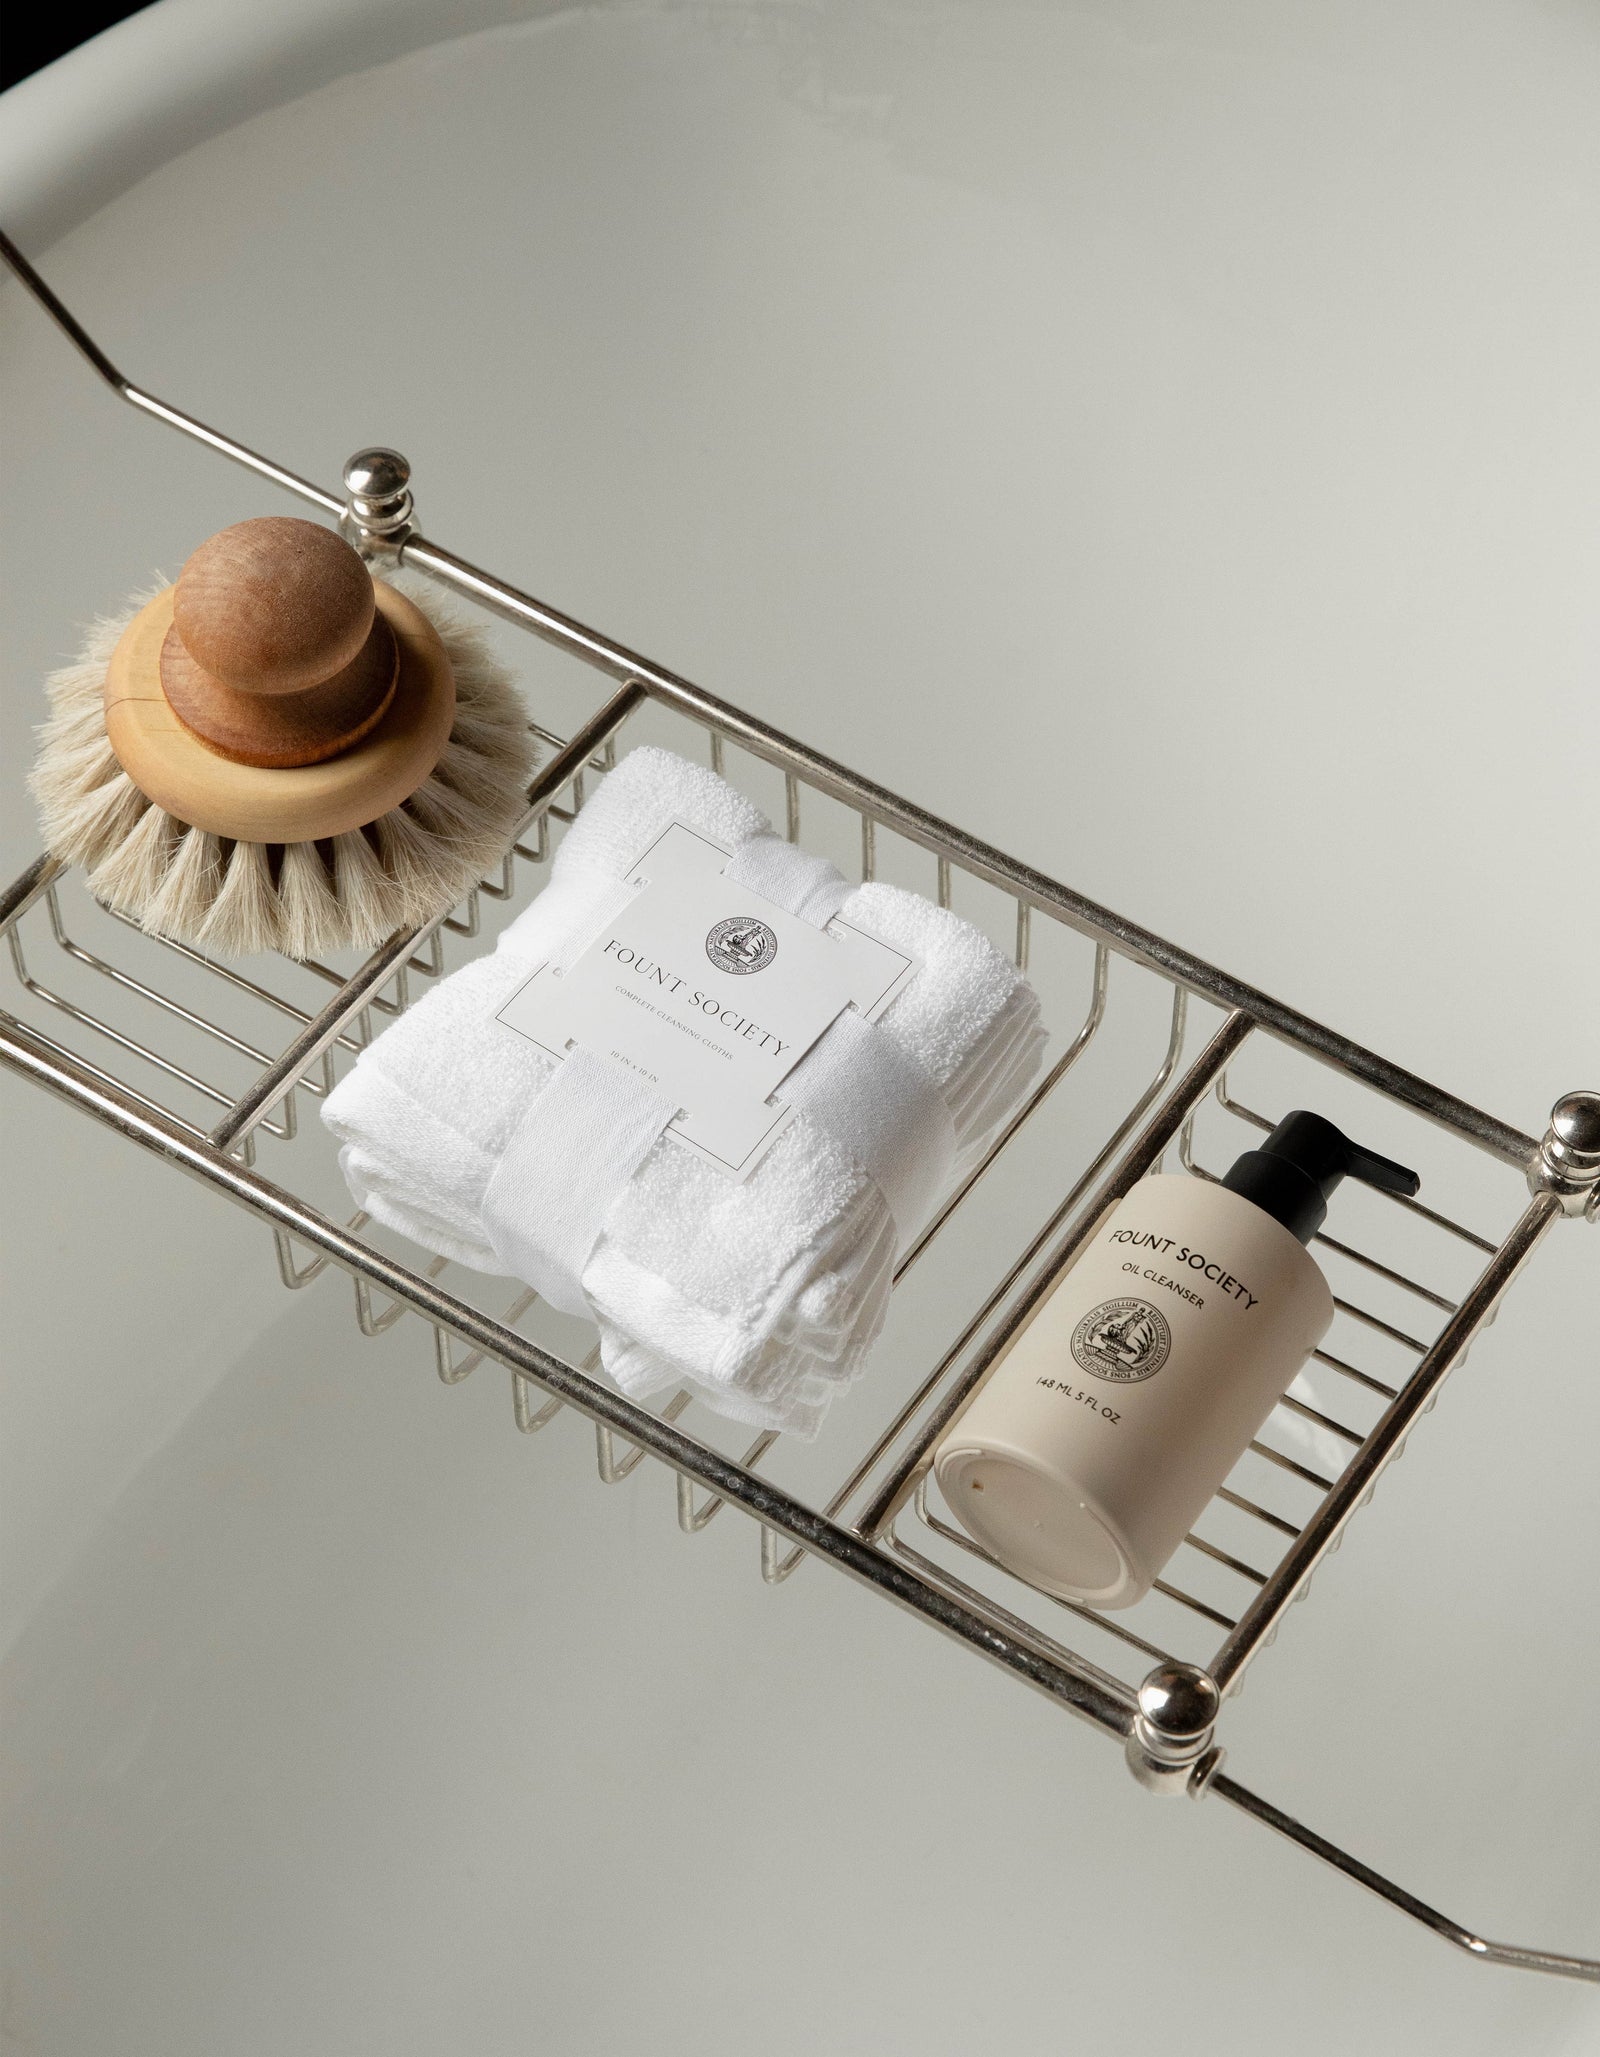 A bathtub tray holds a wooden brush with a rounded handle, a stack of white towels secured with a branded Cozy Earth label, and a beige bottle of bath product labeled "Revitalizing Pair." The background features a clean, white bathtub.